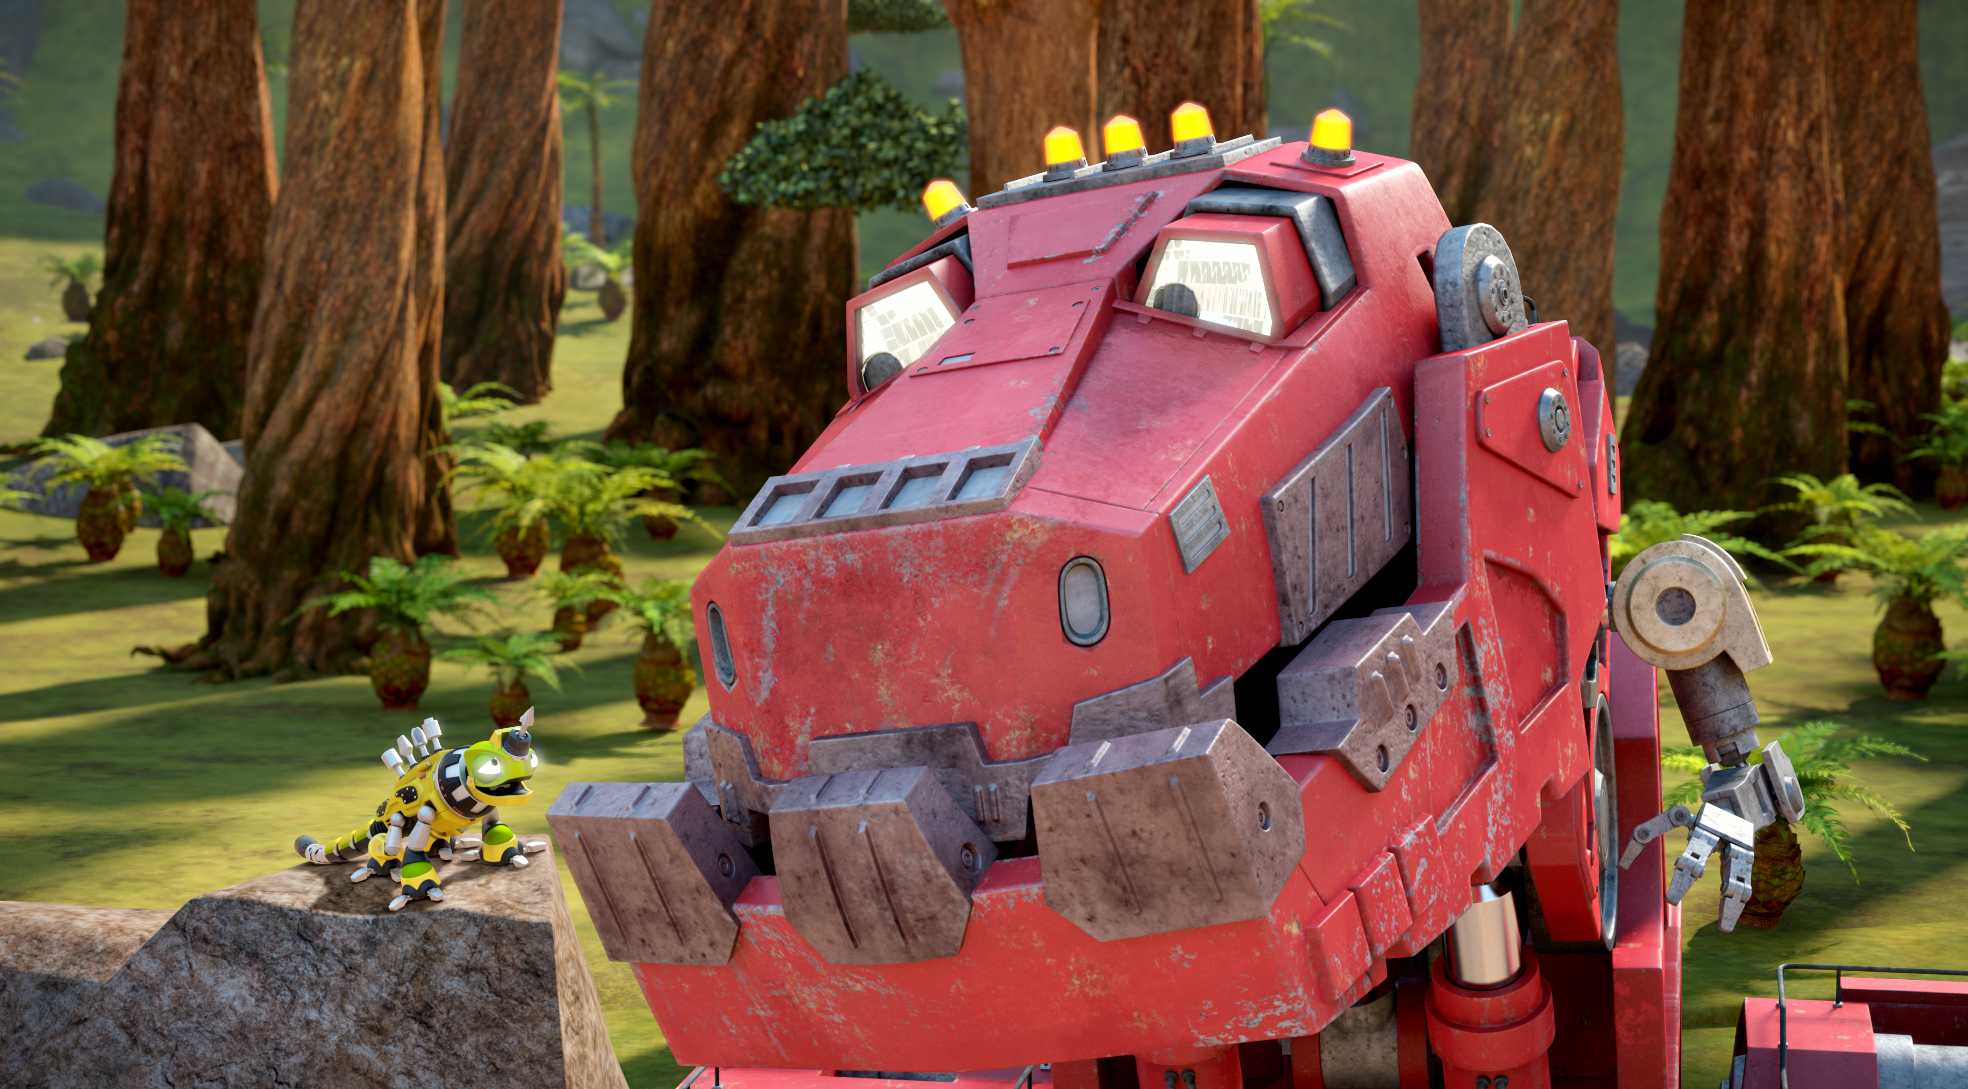 Dinotrux Wallpapers